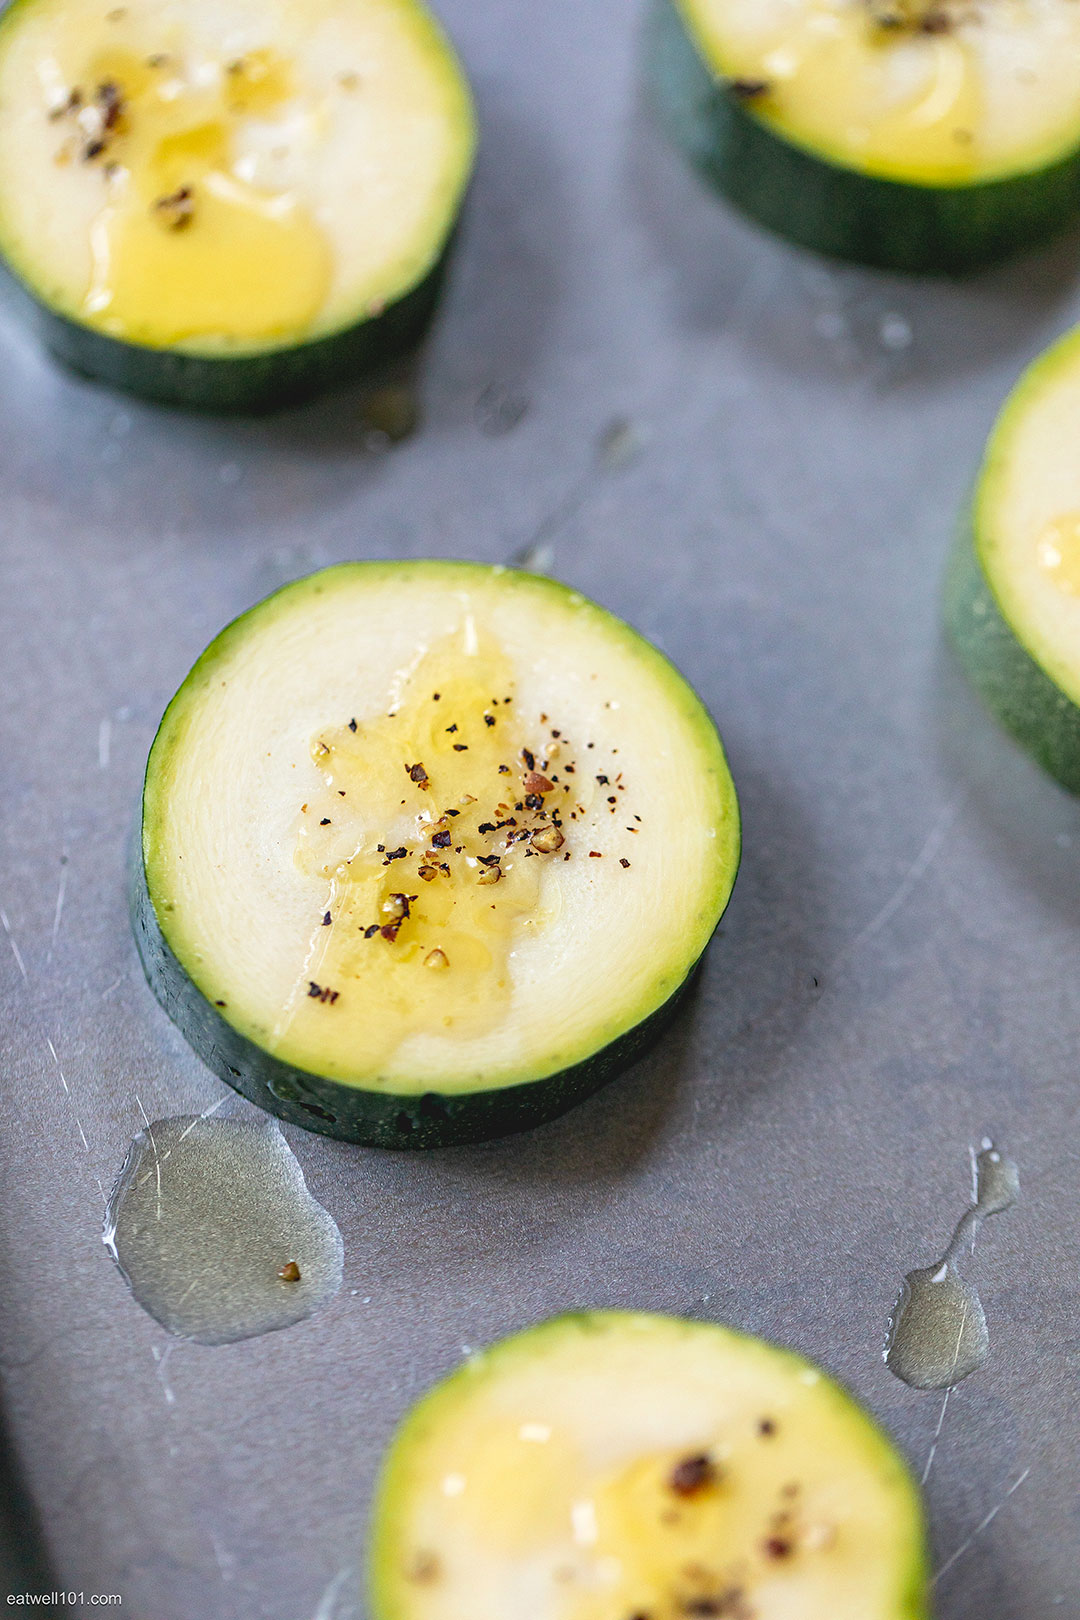 baked zucchini slices recipe